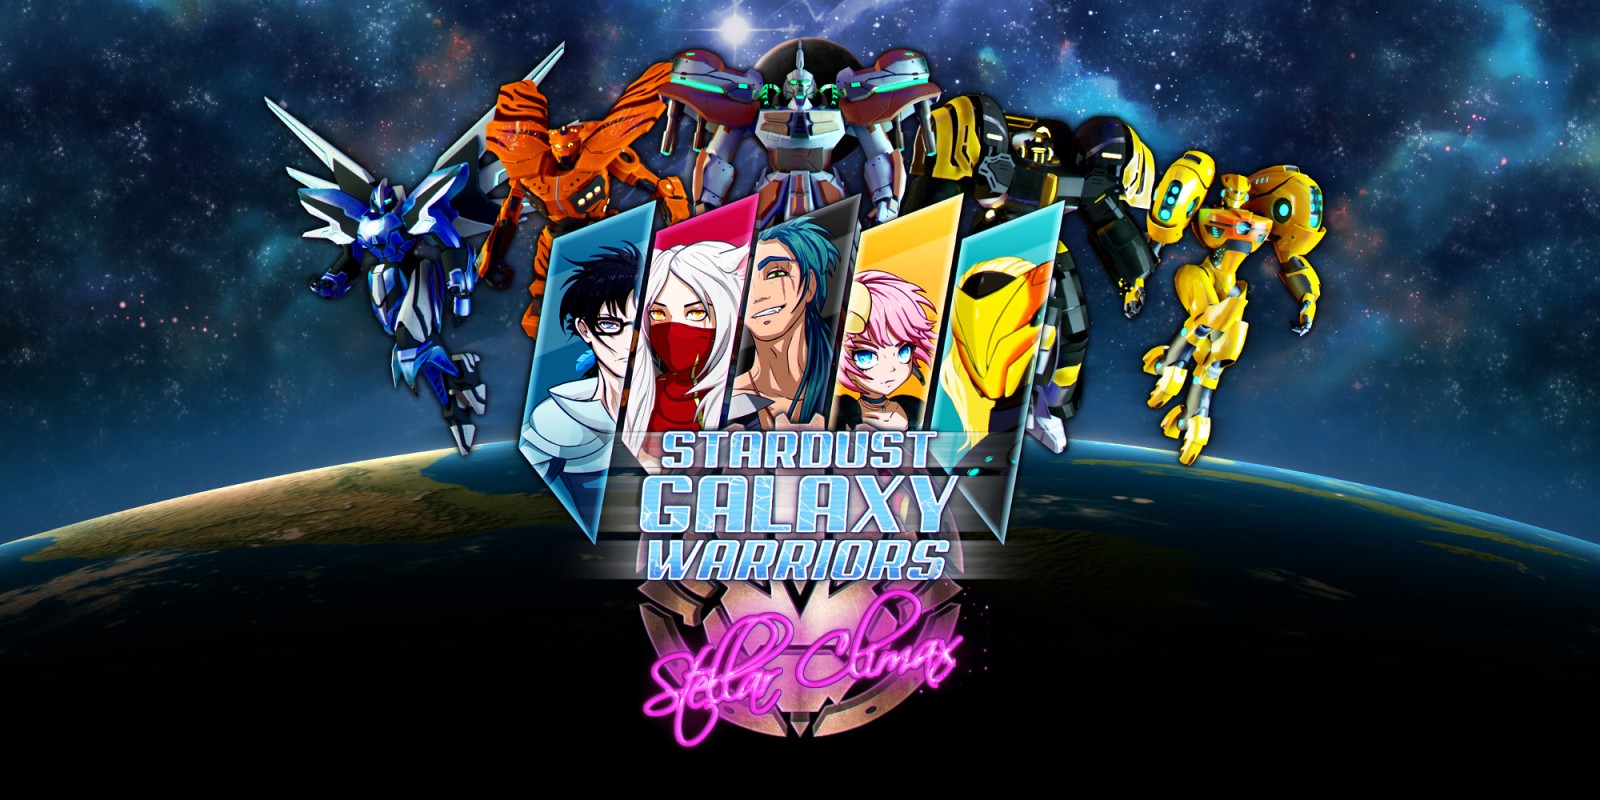 Download Stardust galaxy warriors for PC